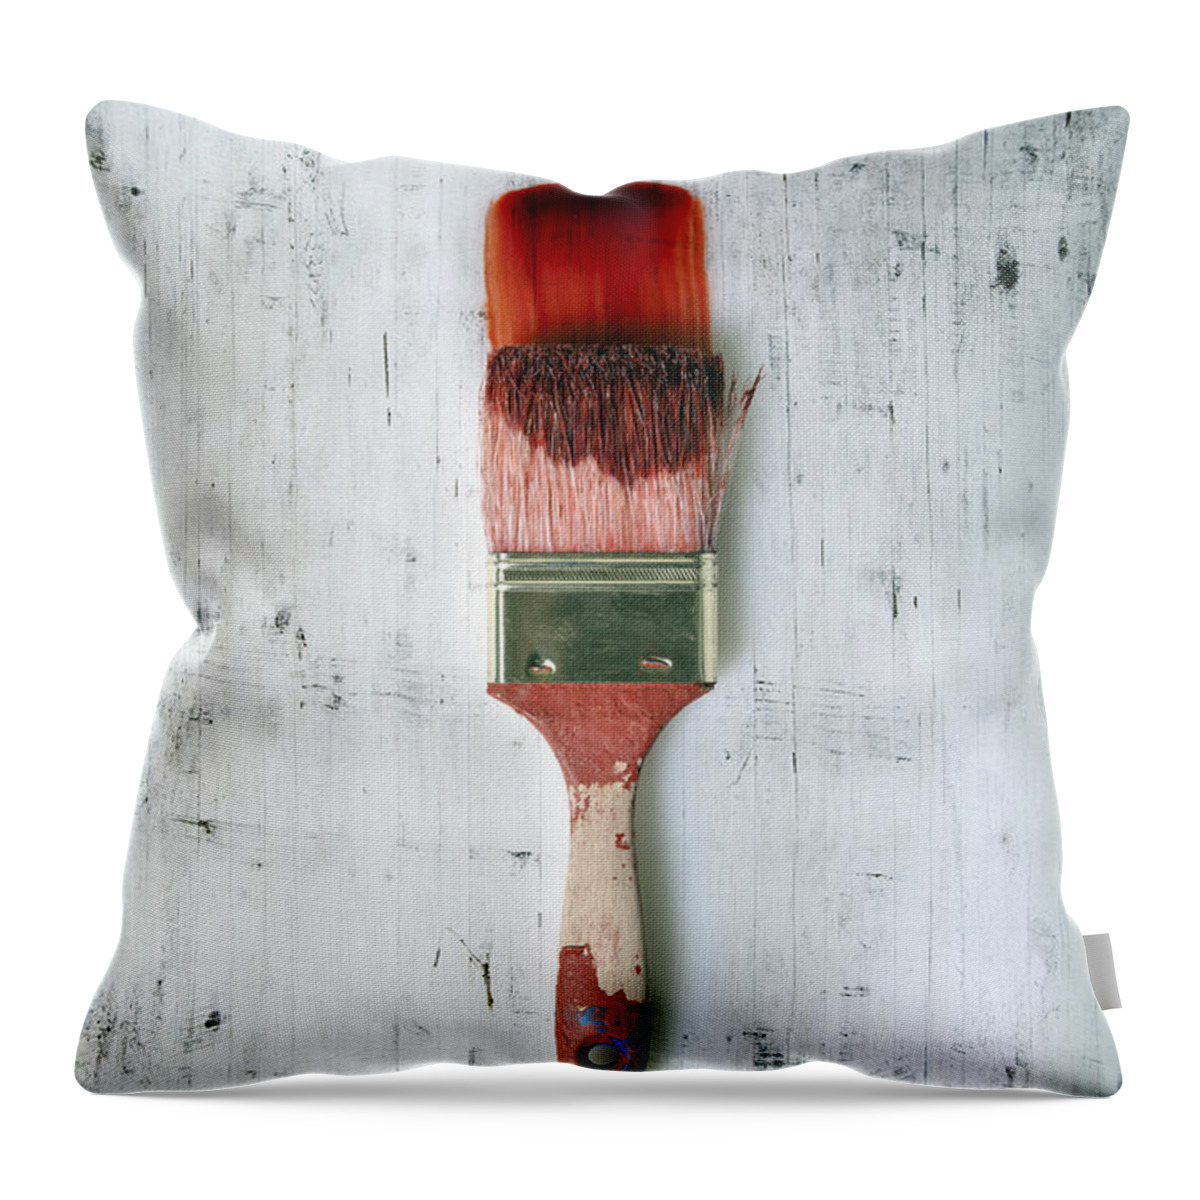 Brush Throw Pillow featuring the photograph Red Paint by Joana Kruse